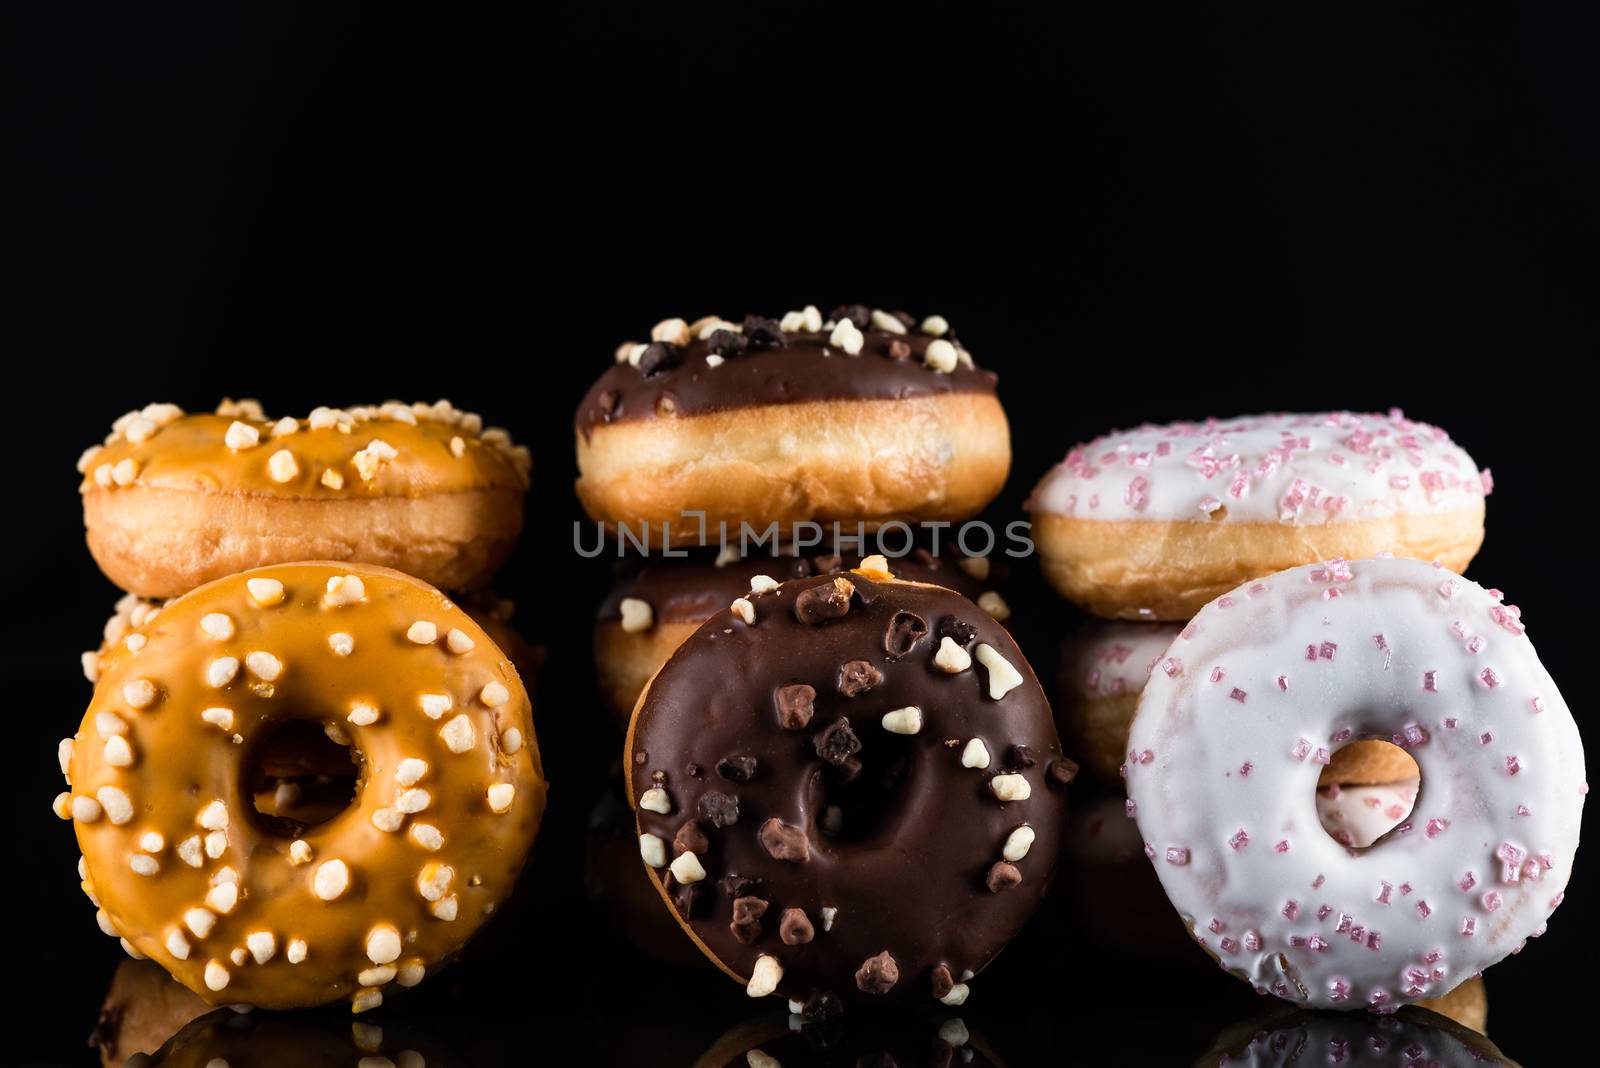 Donuts or Doughnuts Tower on Dark Background. Donut Stack Pile F by merc67